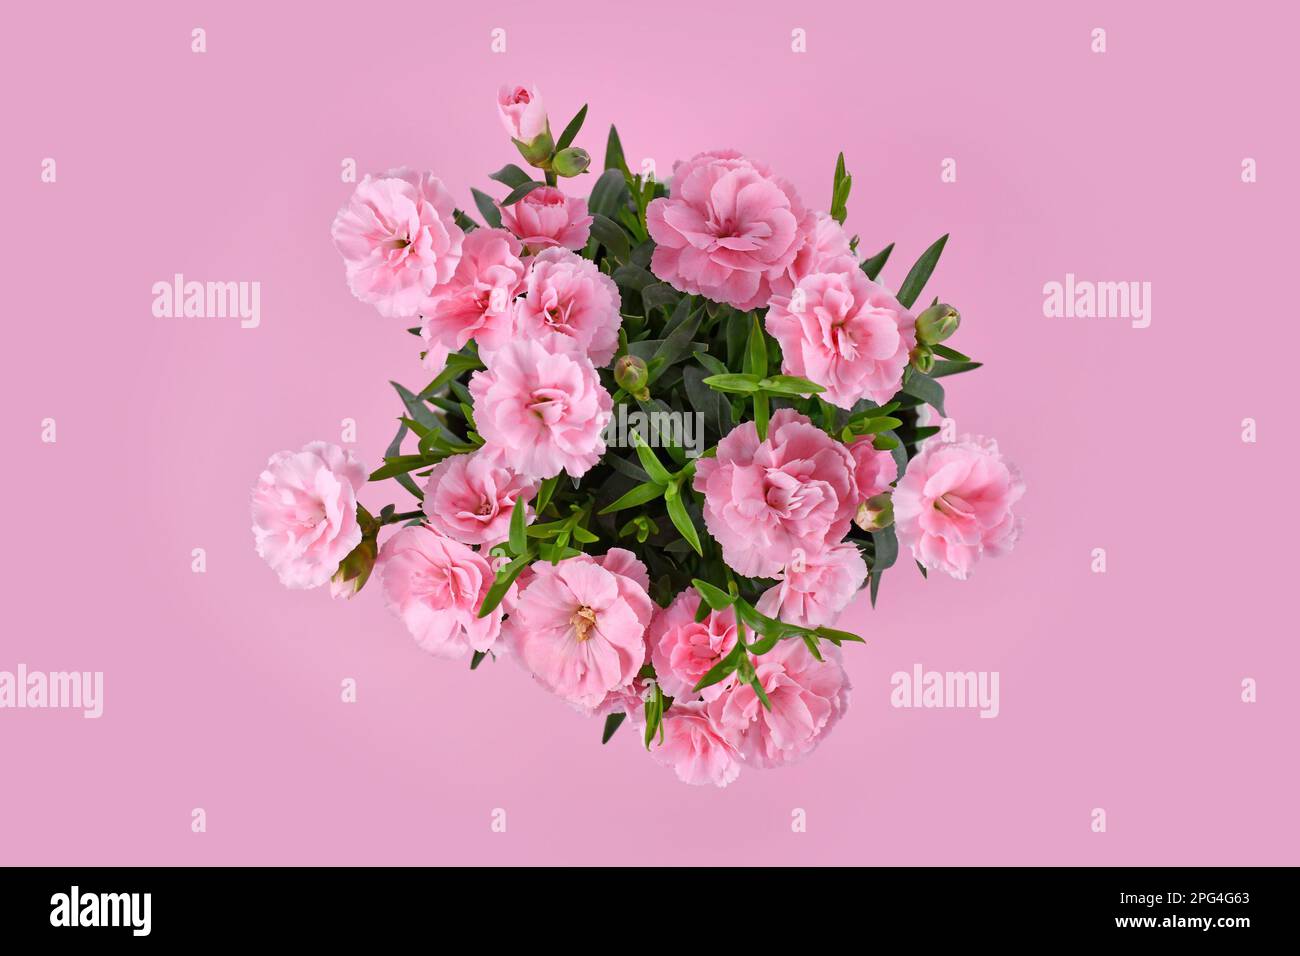 Top view of pink Dianthus flowers on pink background Stock Photo